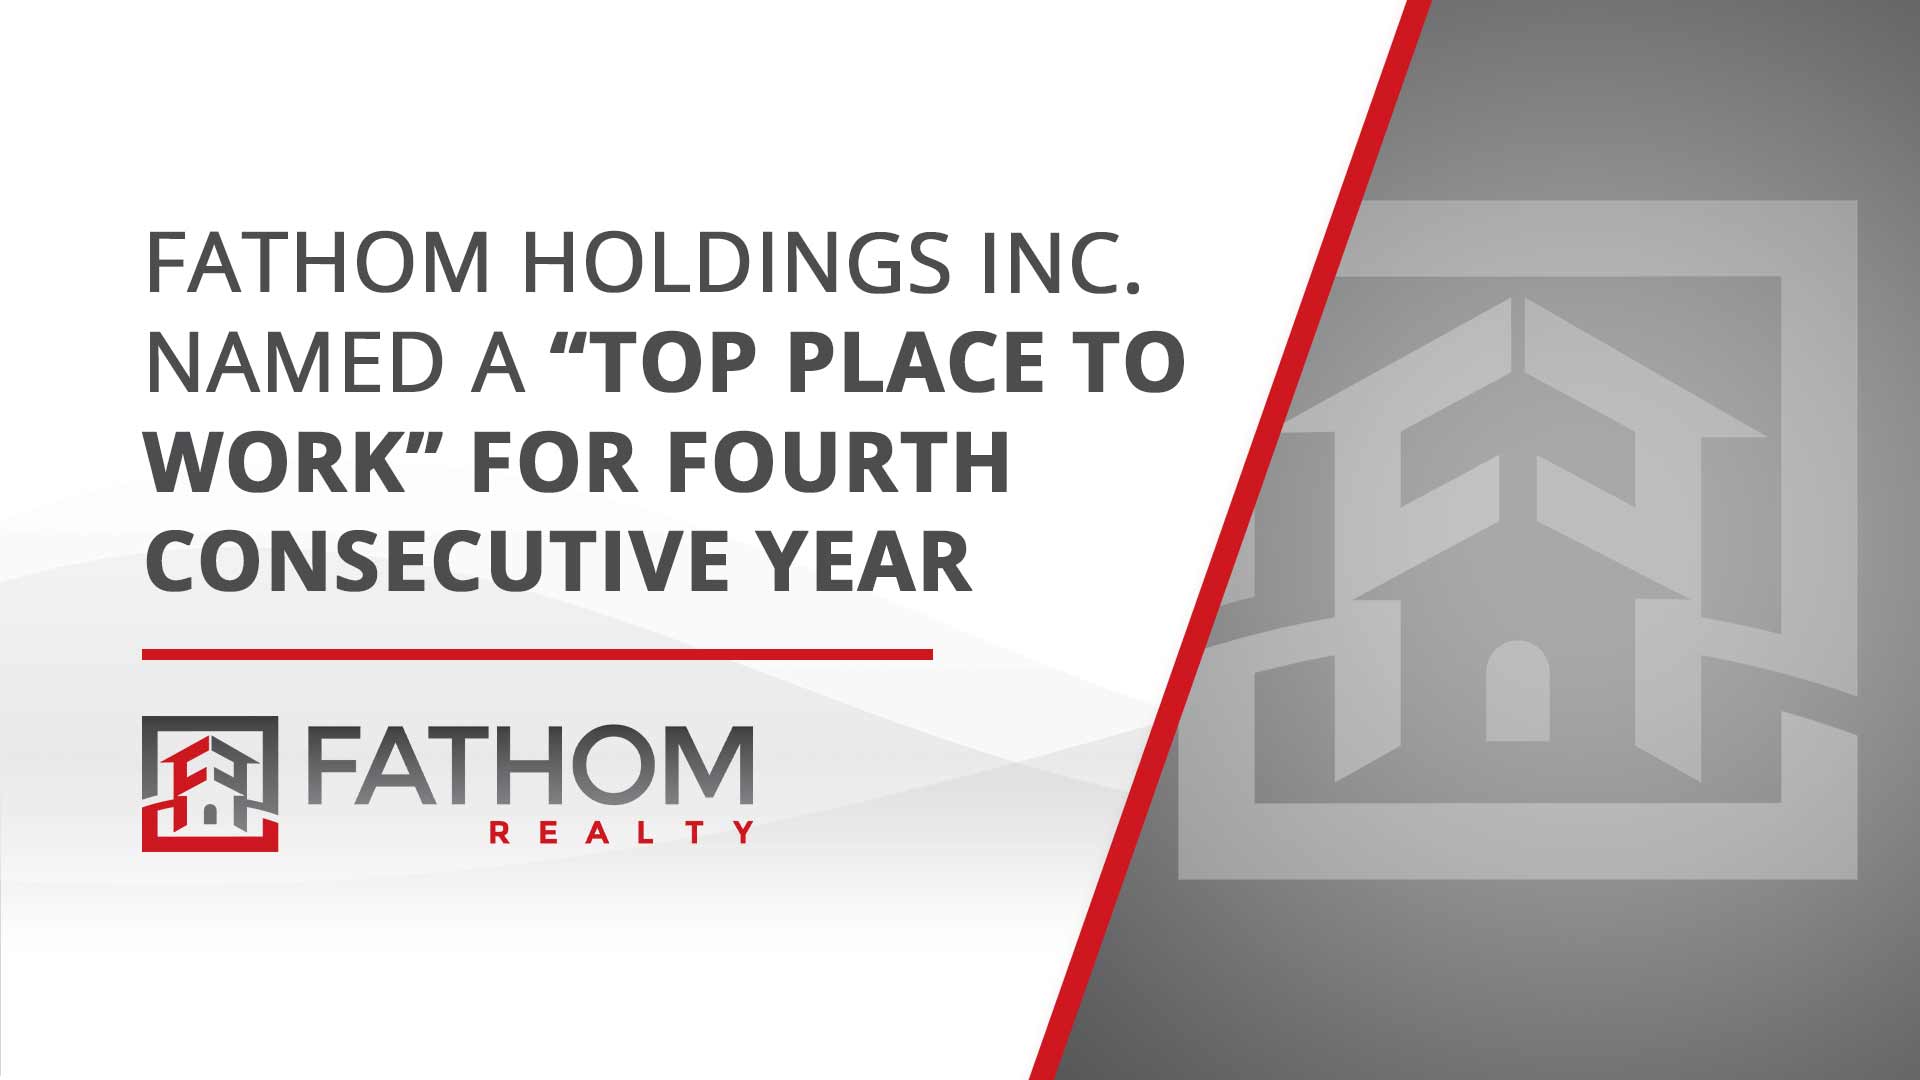 Featured image for “Fathom Holdings Inc. Named a “Top Place to Work”  for Fourth Consecutive Year”